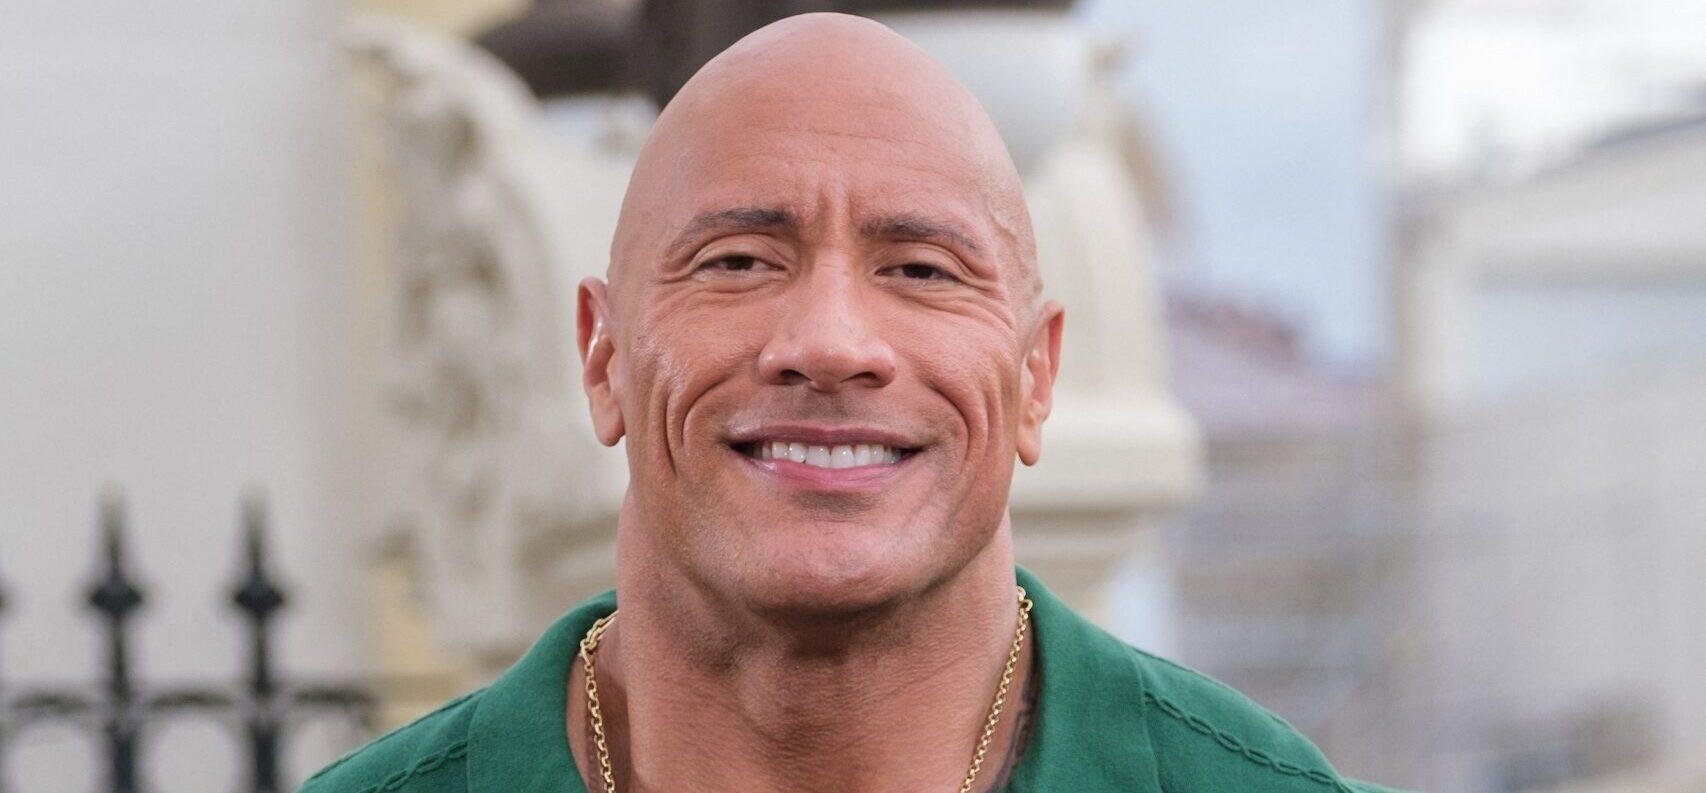 Dwayne Johnson just made a seven figure donation to SAG-AFTRA donation